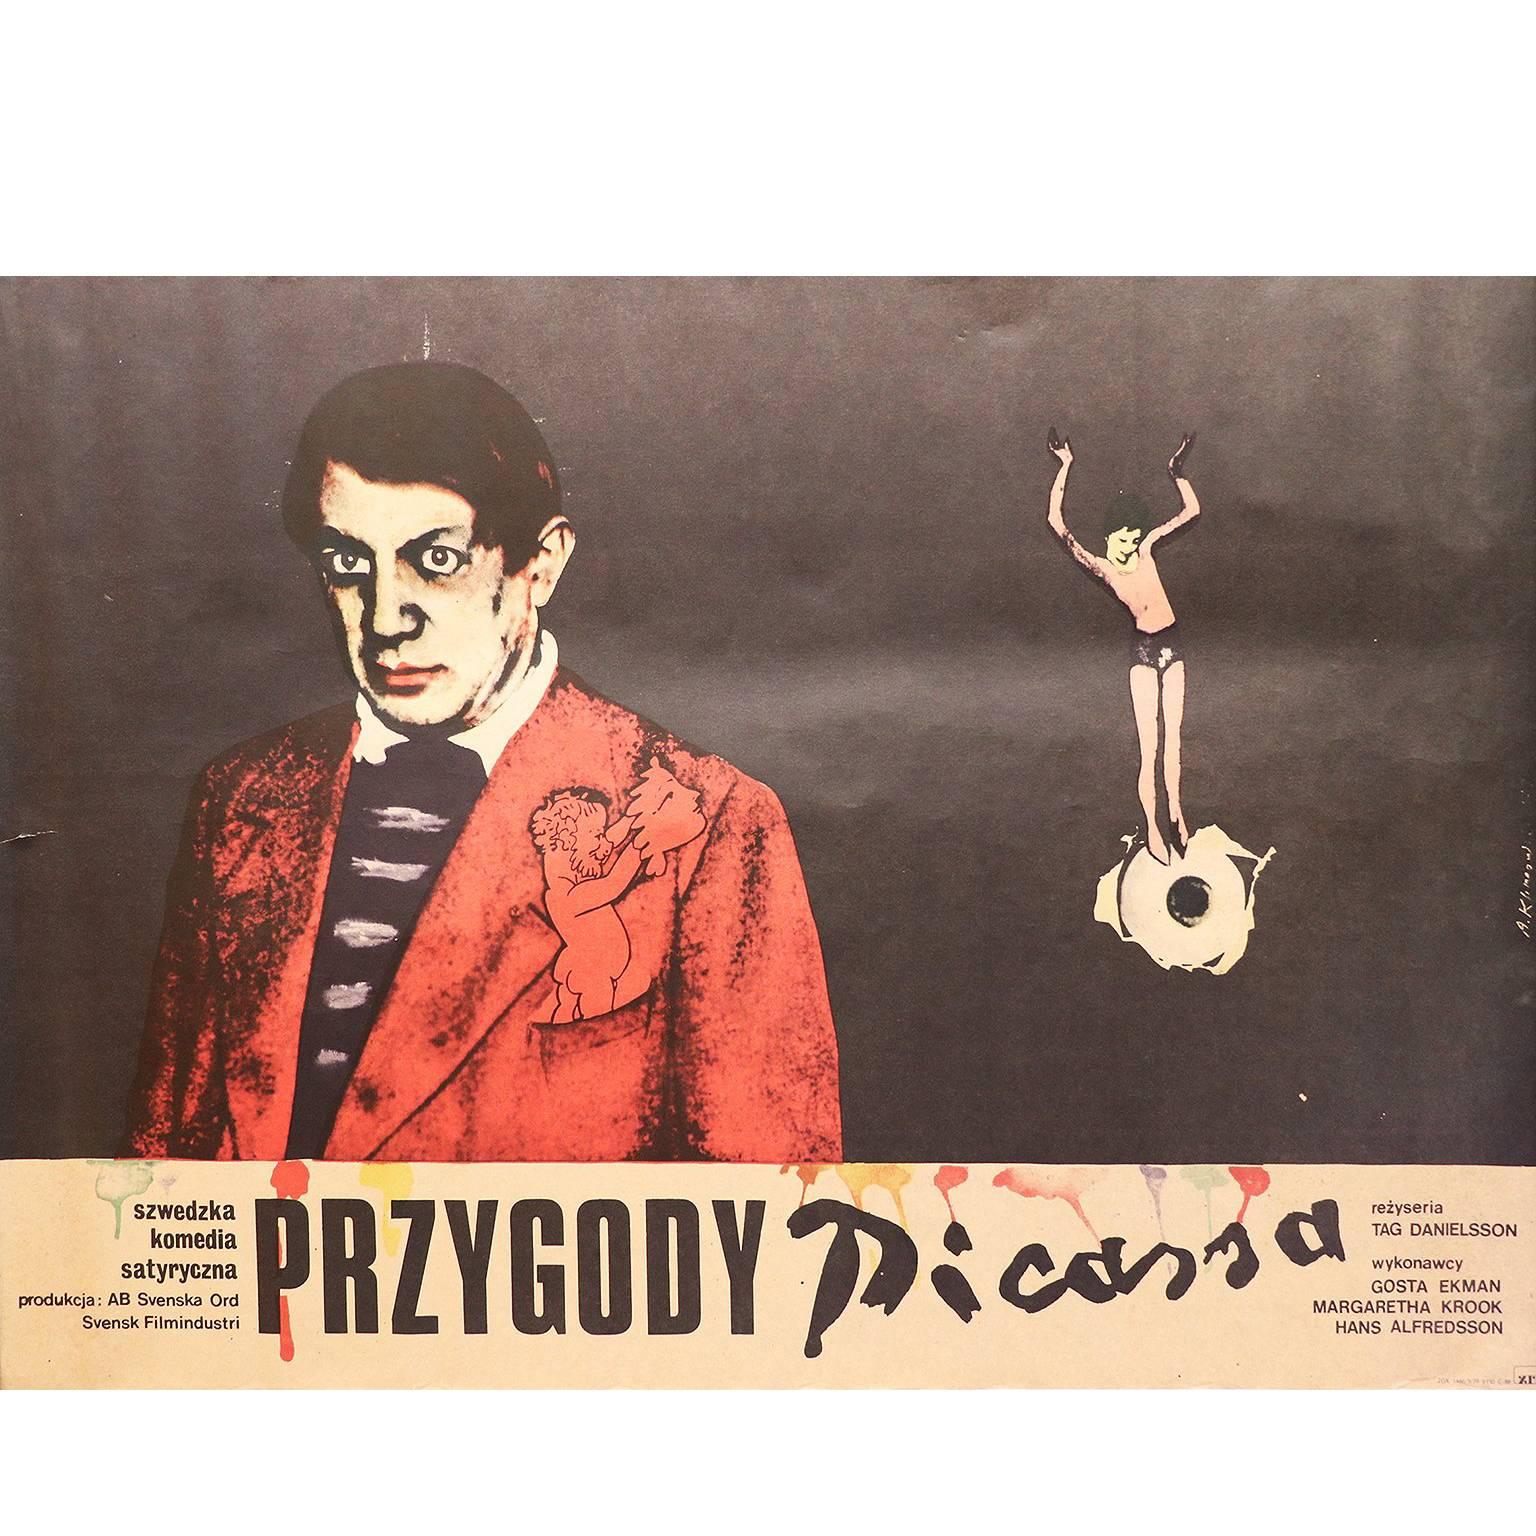 Adventures of Picasso, Original Polish Poster for the Swedish Film, 1979 For Sale